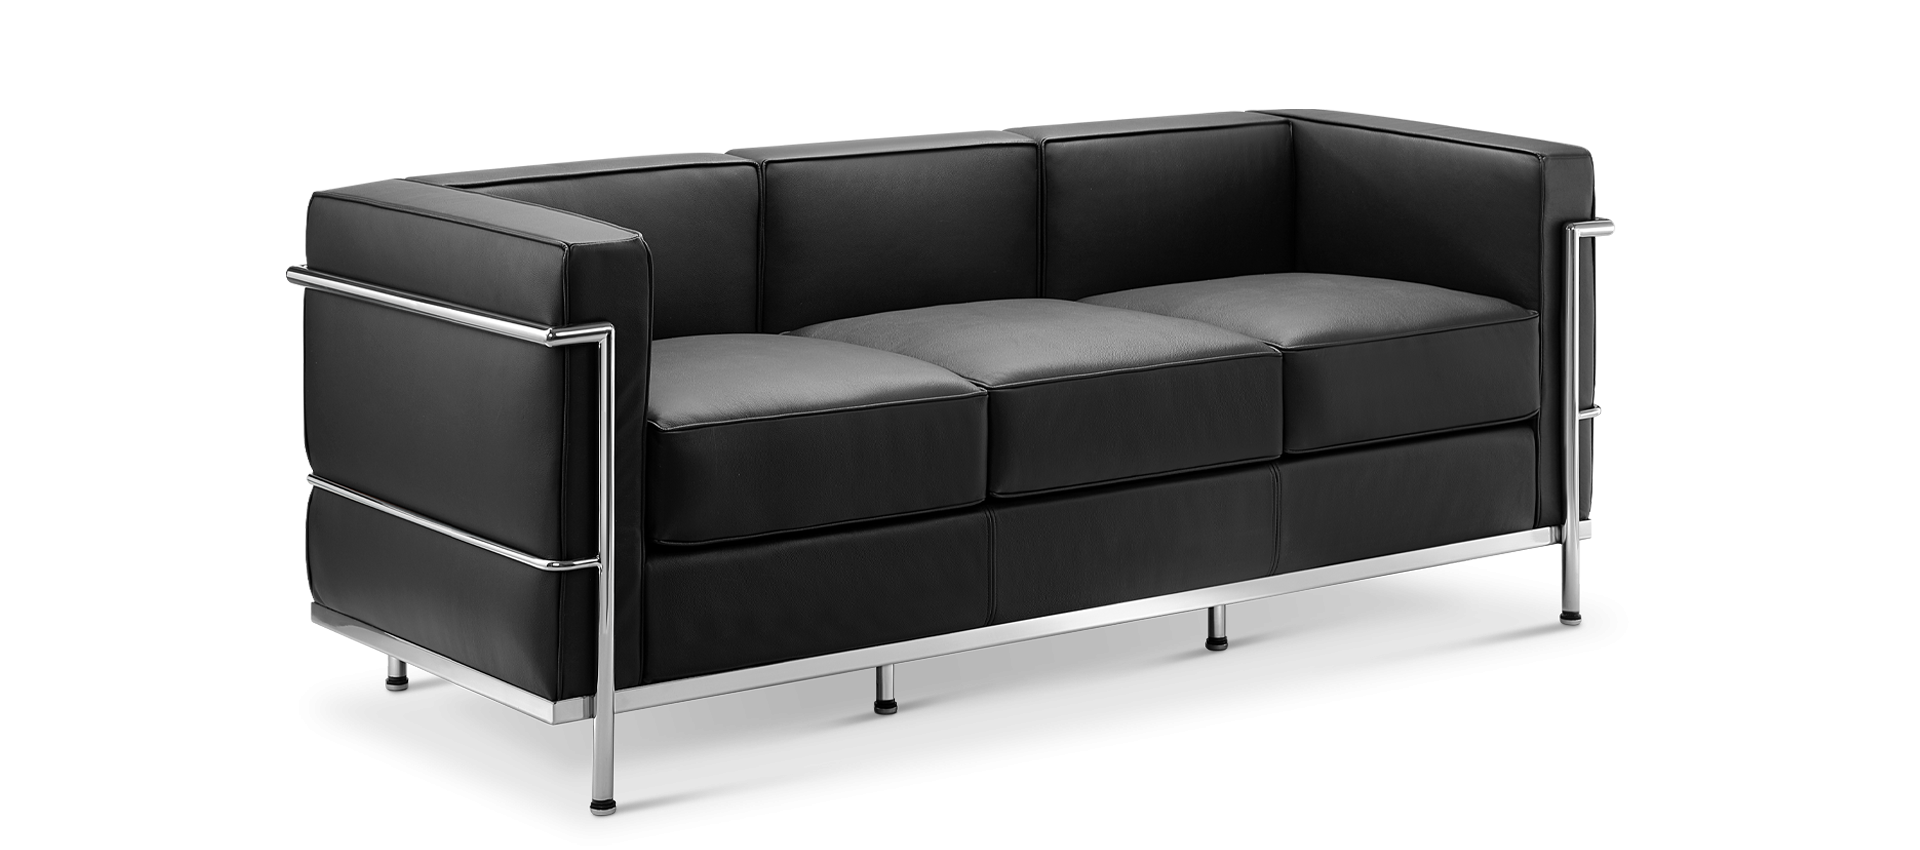 Vrijwillig Confronteren Maladroit Buy the LC2 Style 3 Seater Sofa - Black Leather - at Uk online with  delivery | online store Mobelaris.